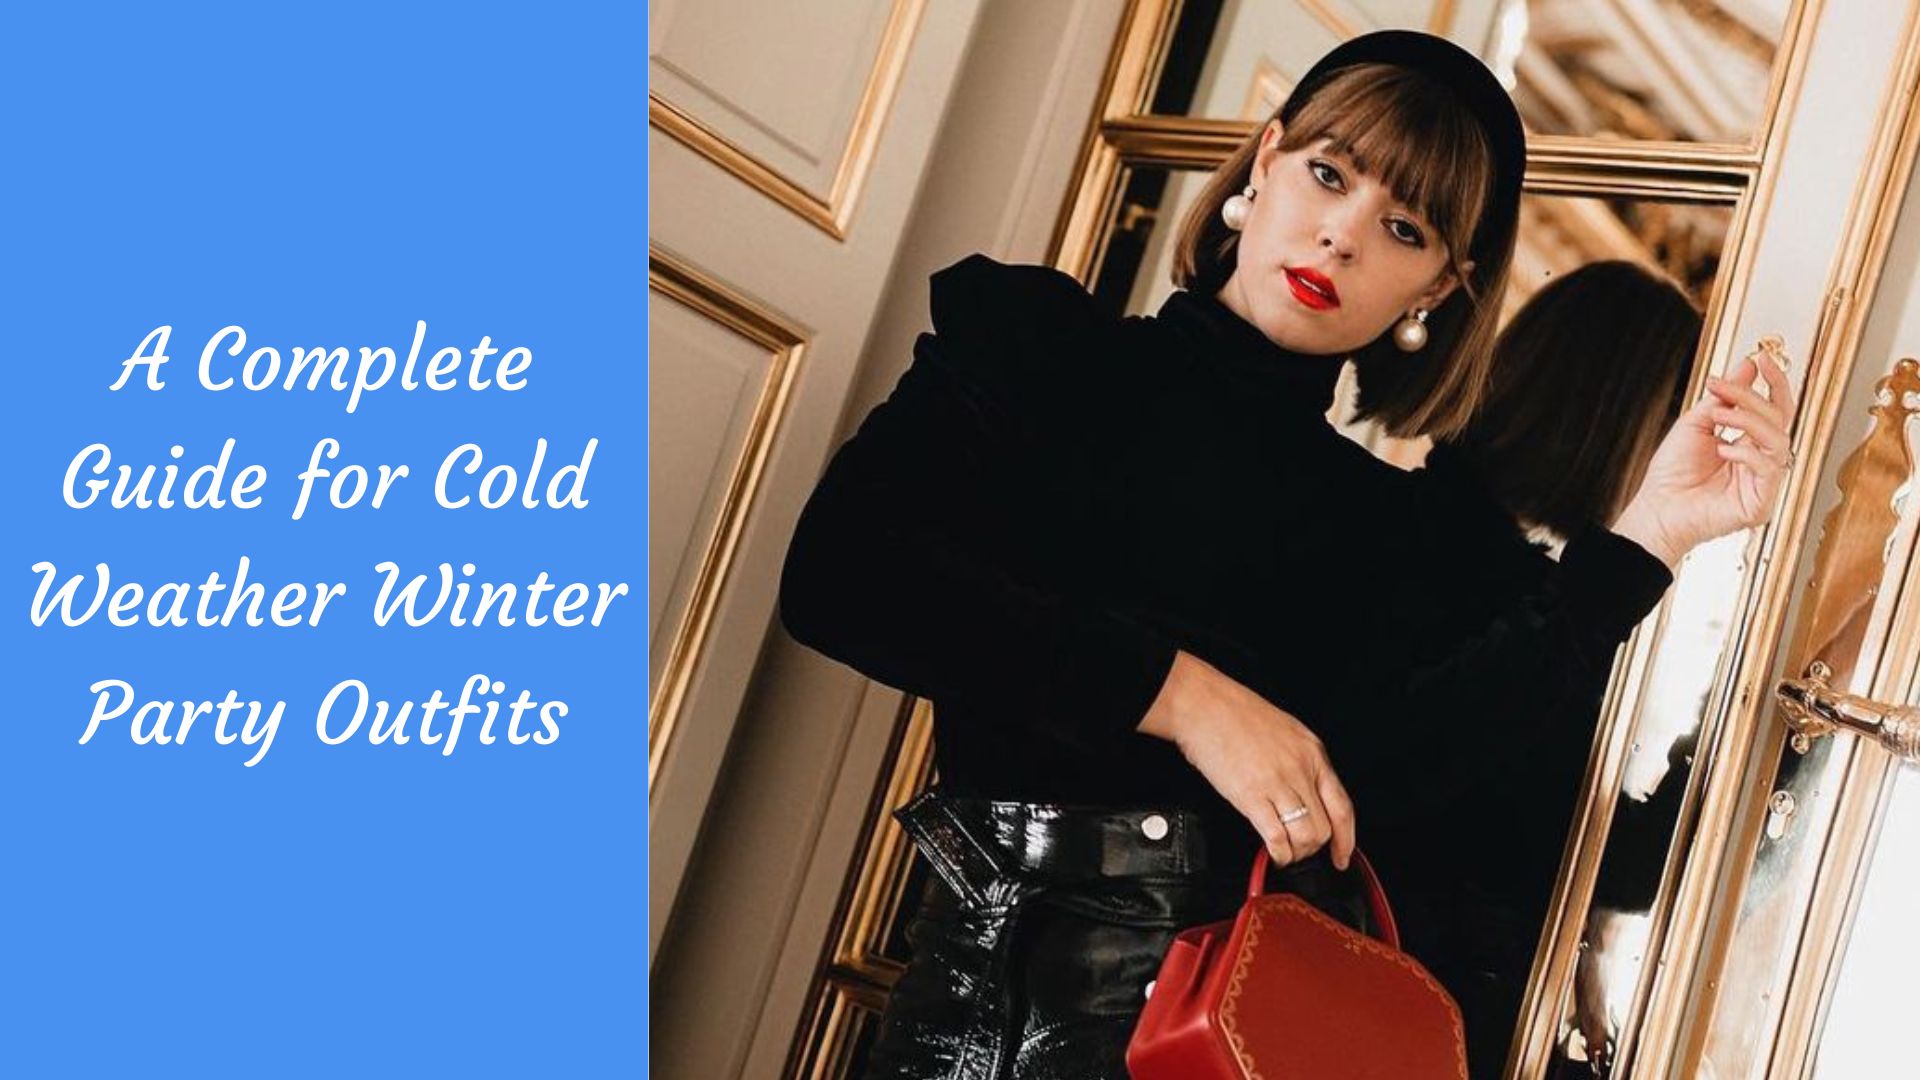 A Complete Guide for Cold Weather Winter Party Outfits